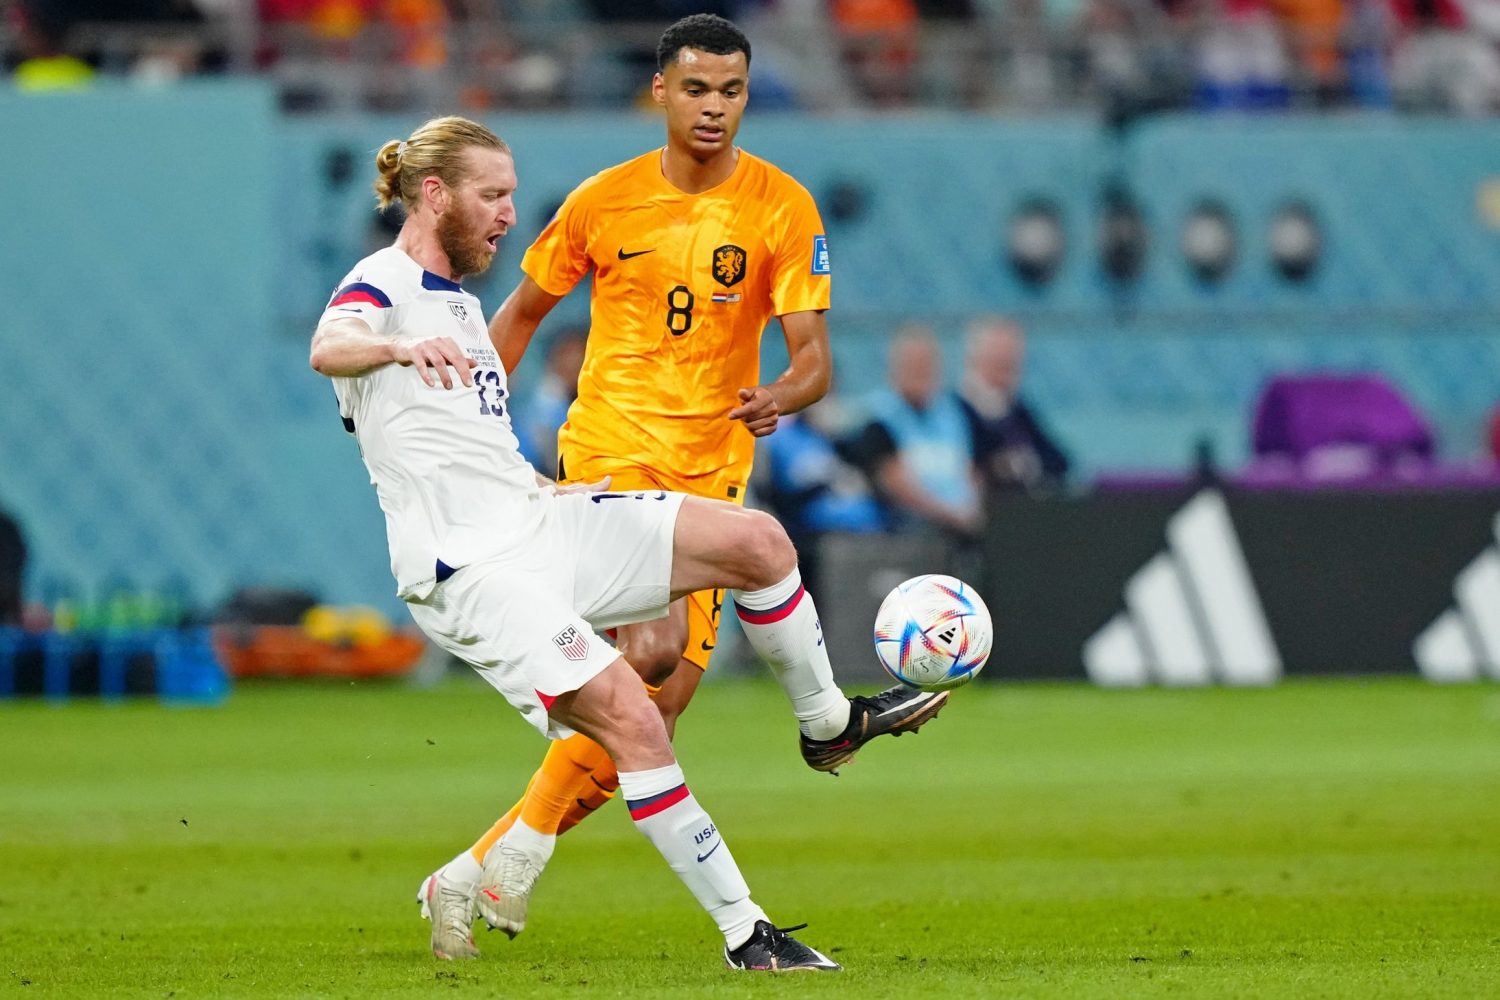 United States of America defender Tim Ream (13) controls the ball against Netherlands forward Cody Gakpo (8) during the first half of a round of sixteen match in the 2022 FIFA World Cup at Khalifa International Stadium.